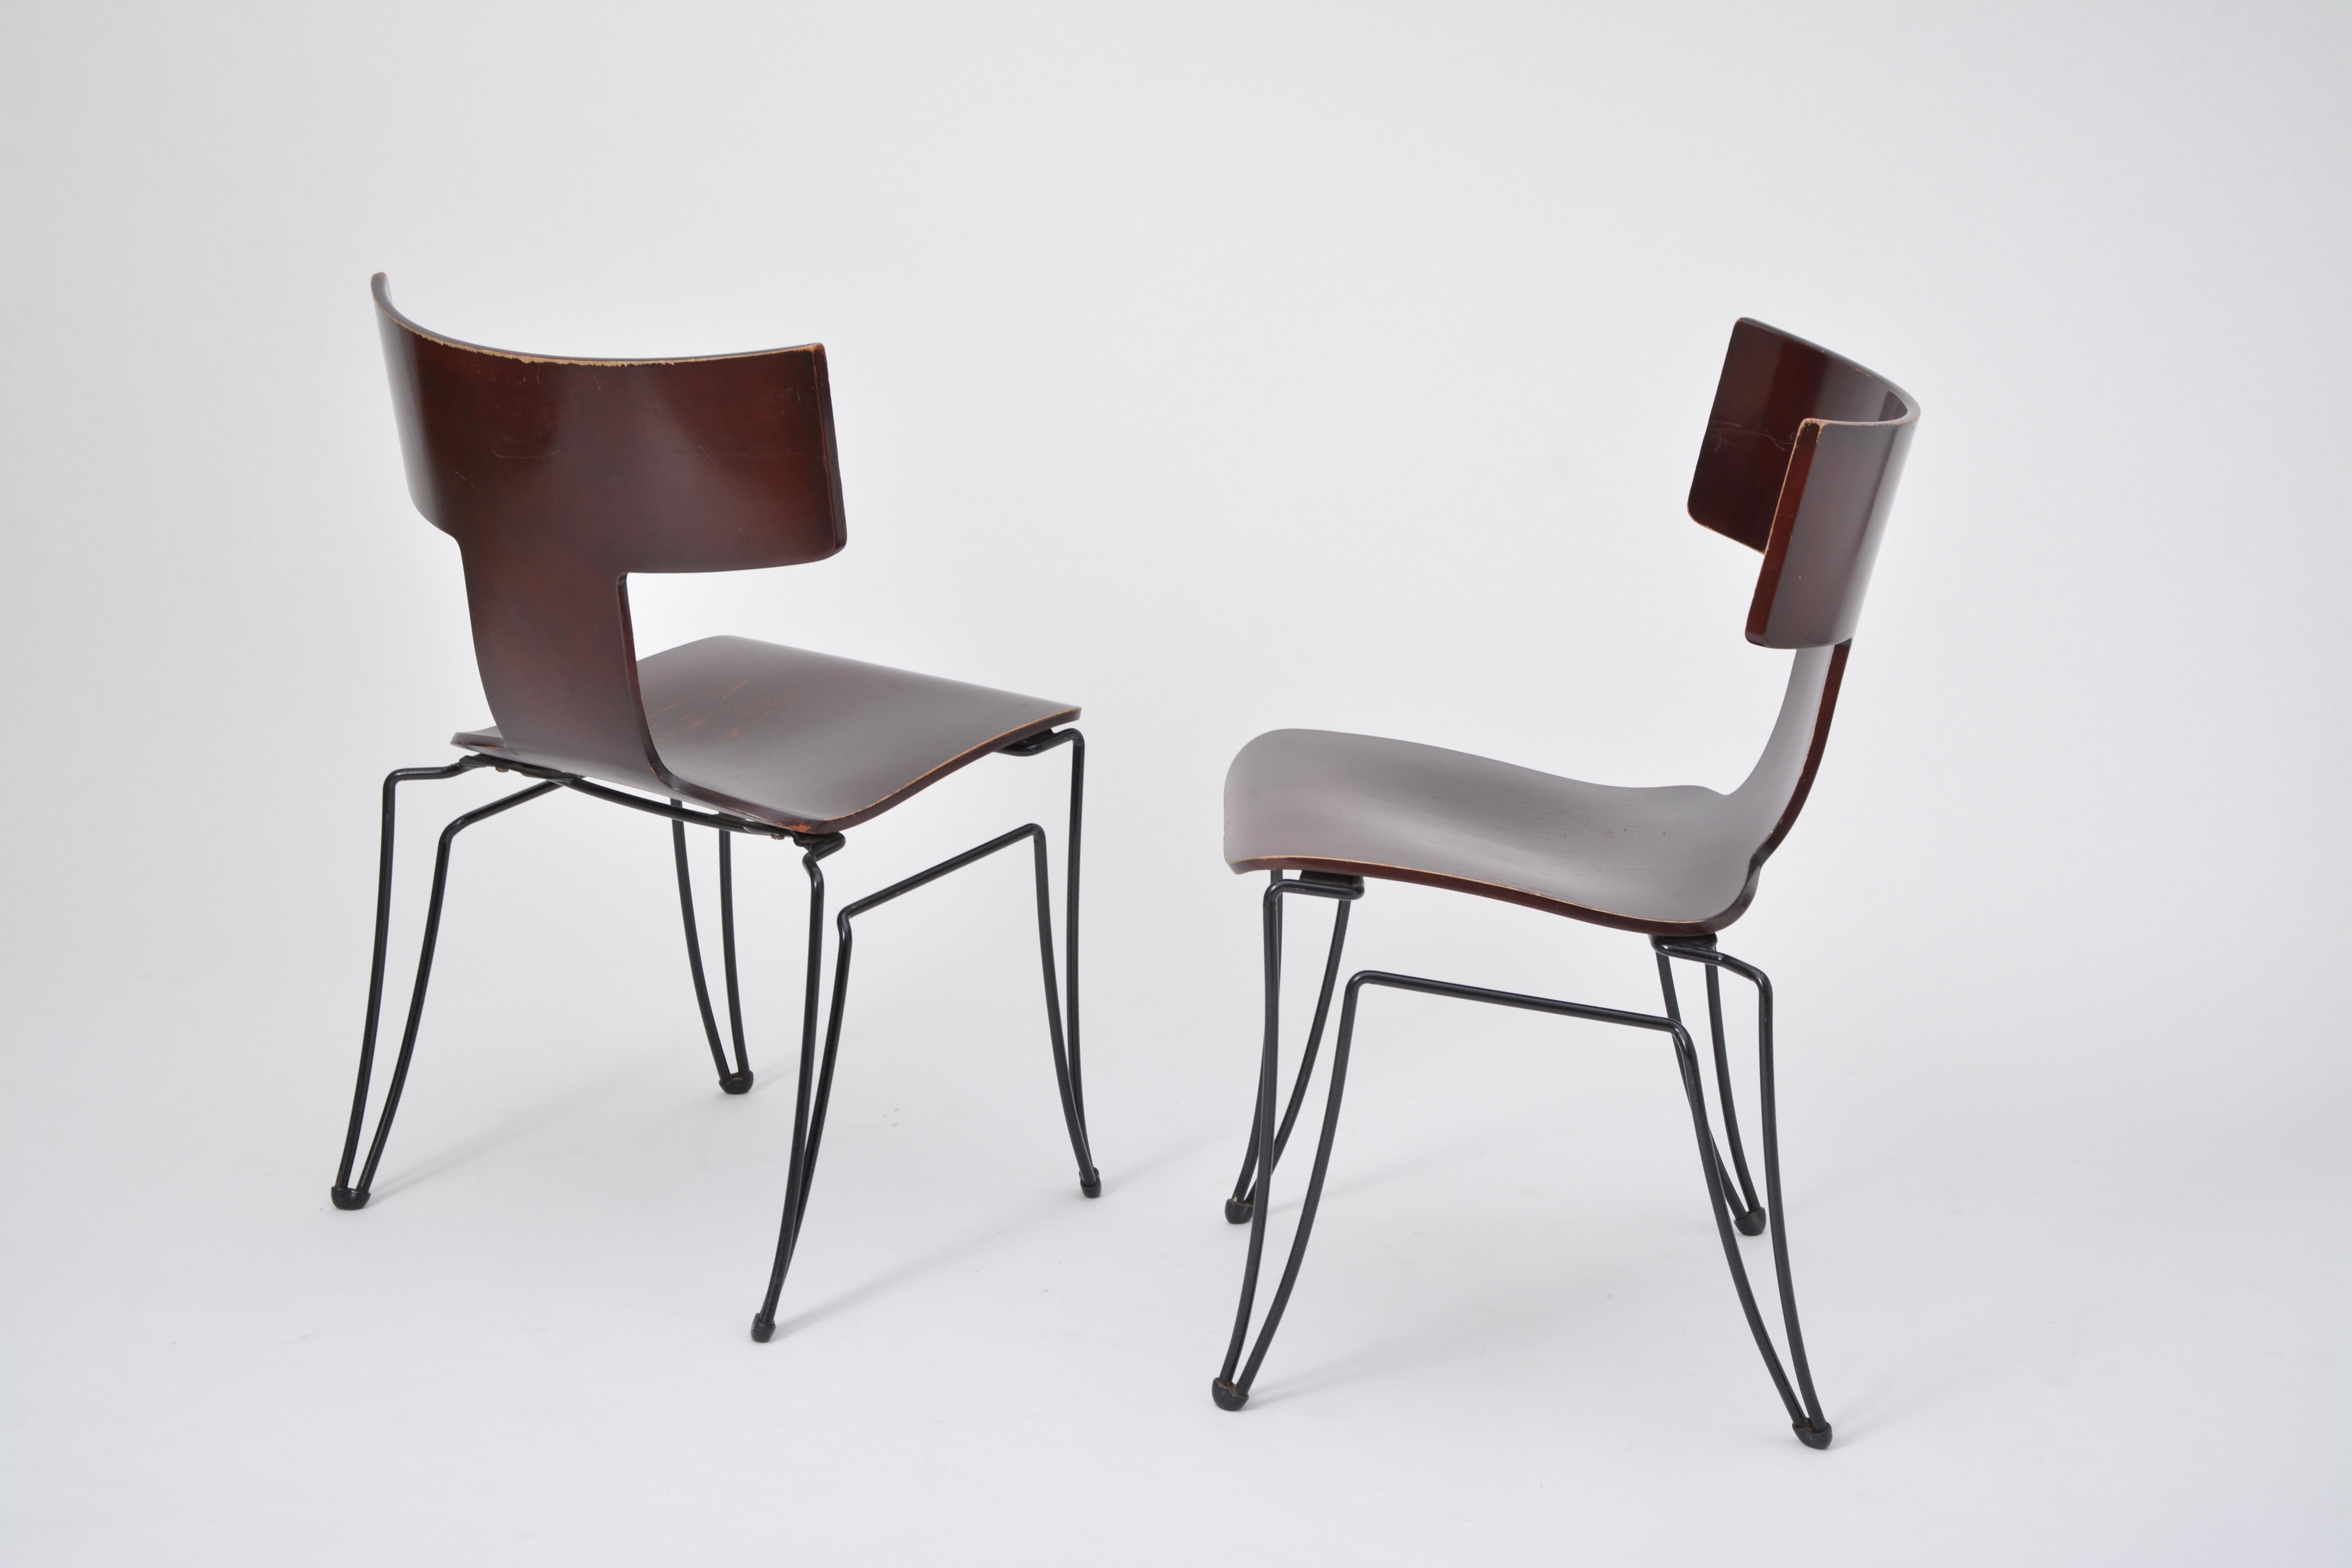 This set of two chairs was produced by Donghia in the 1980s. The model Anziano was designed by John Hutton. The structures are made of black coated steelwire, the seats are made of molded beechwood veneer. The chairs are stackable.